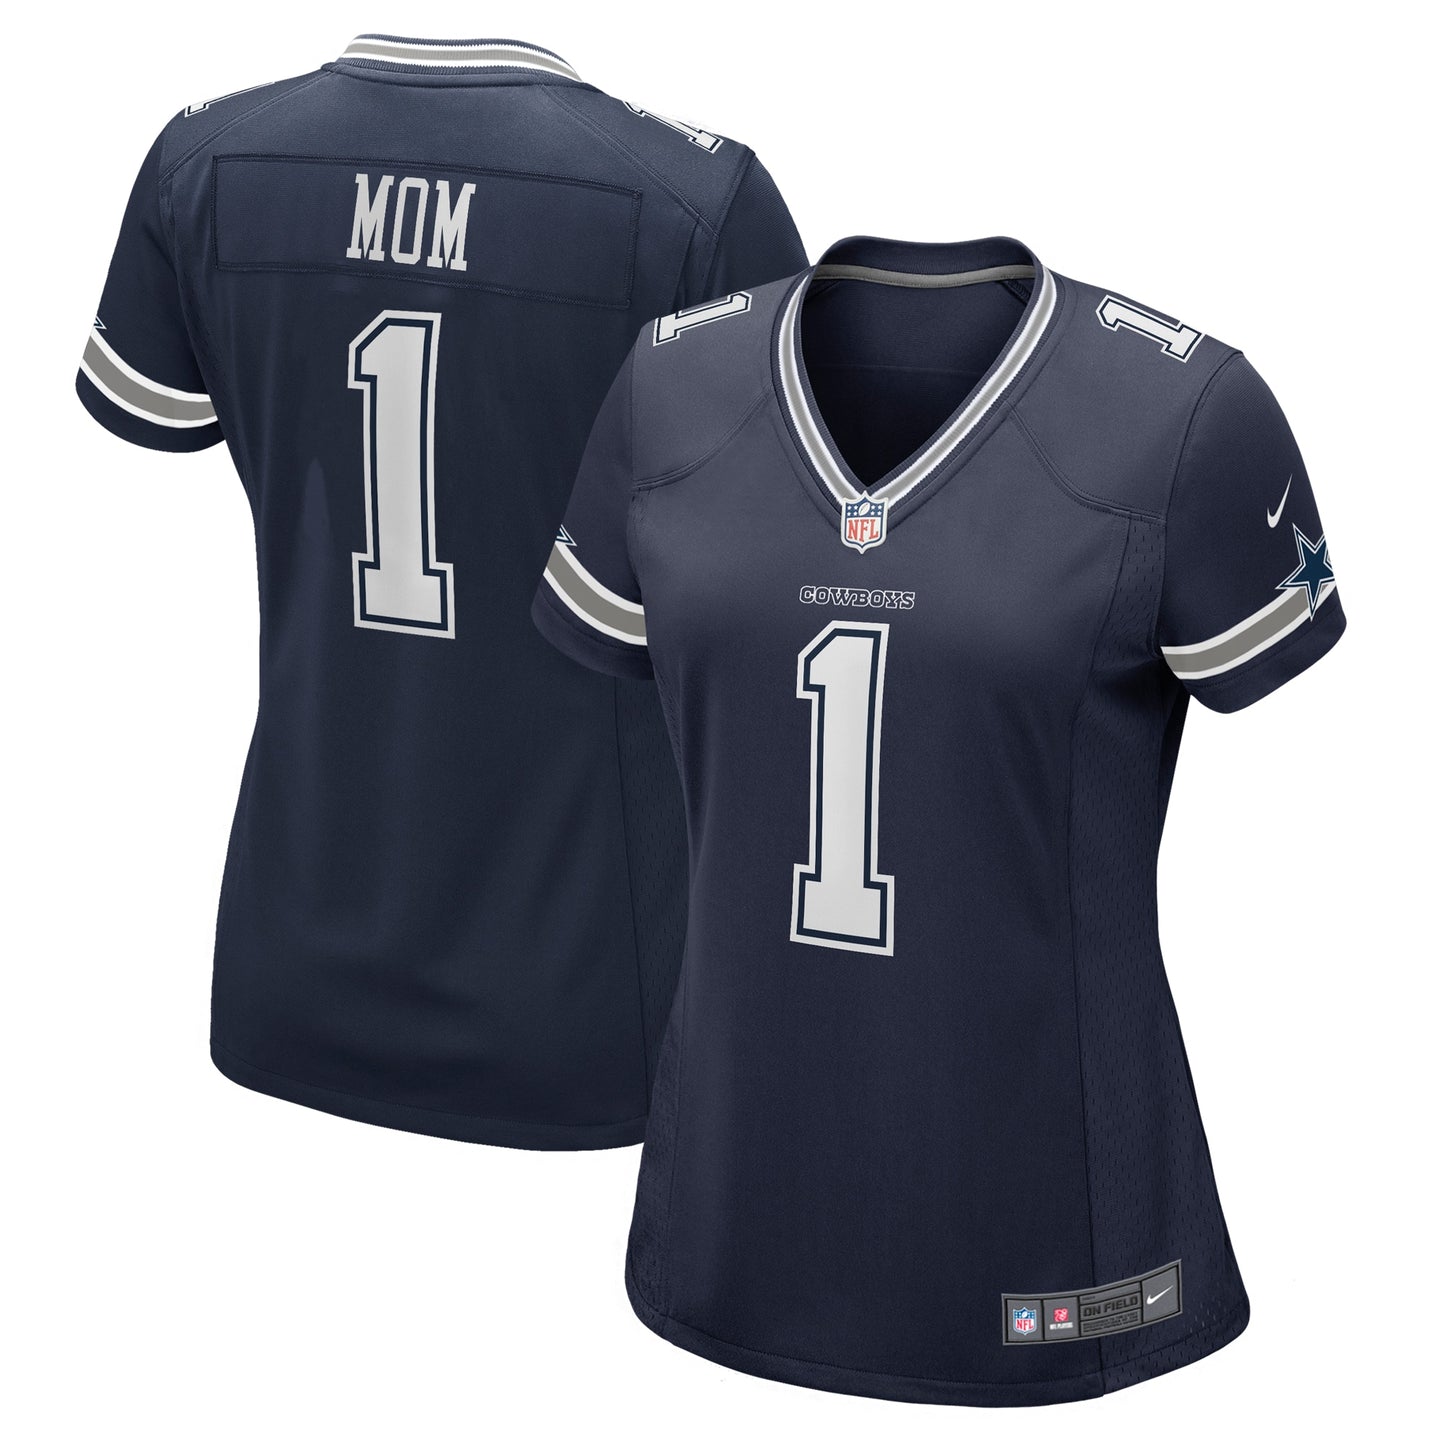 Number 1 Mom Dallas Cowboys Nike Women's Game Jersey - Navy